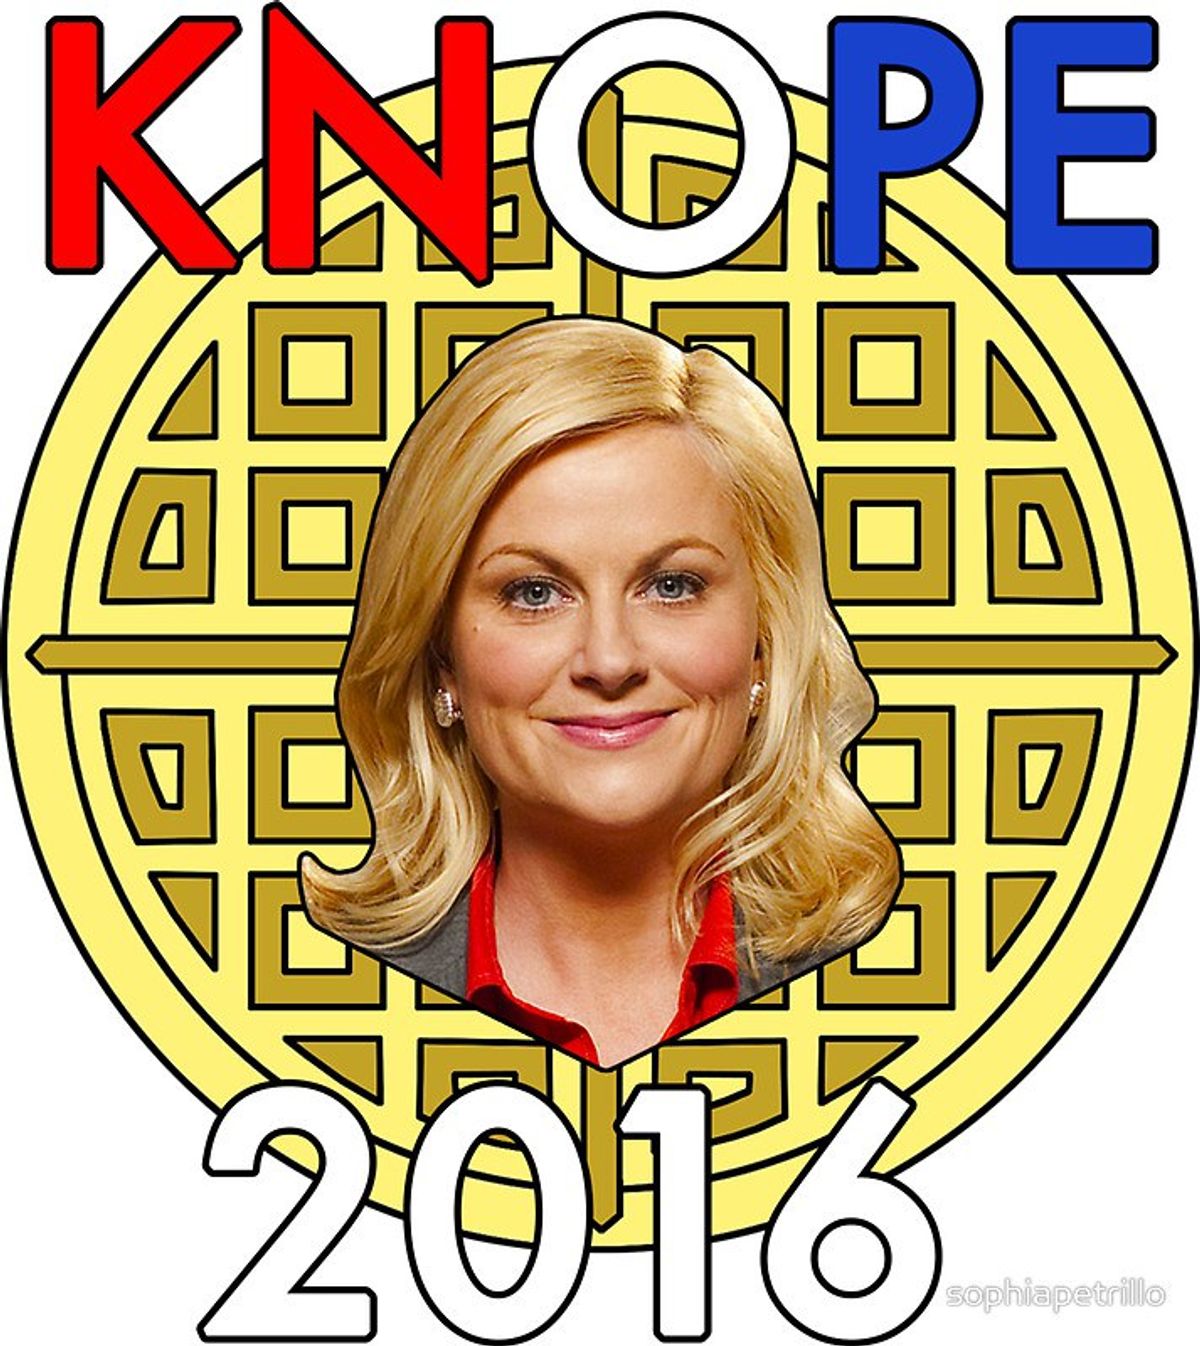 5 Ways The 2016 Election Is Just Like Knope vs. Newport 2012